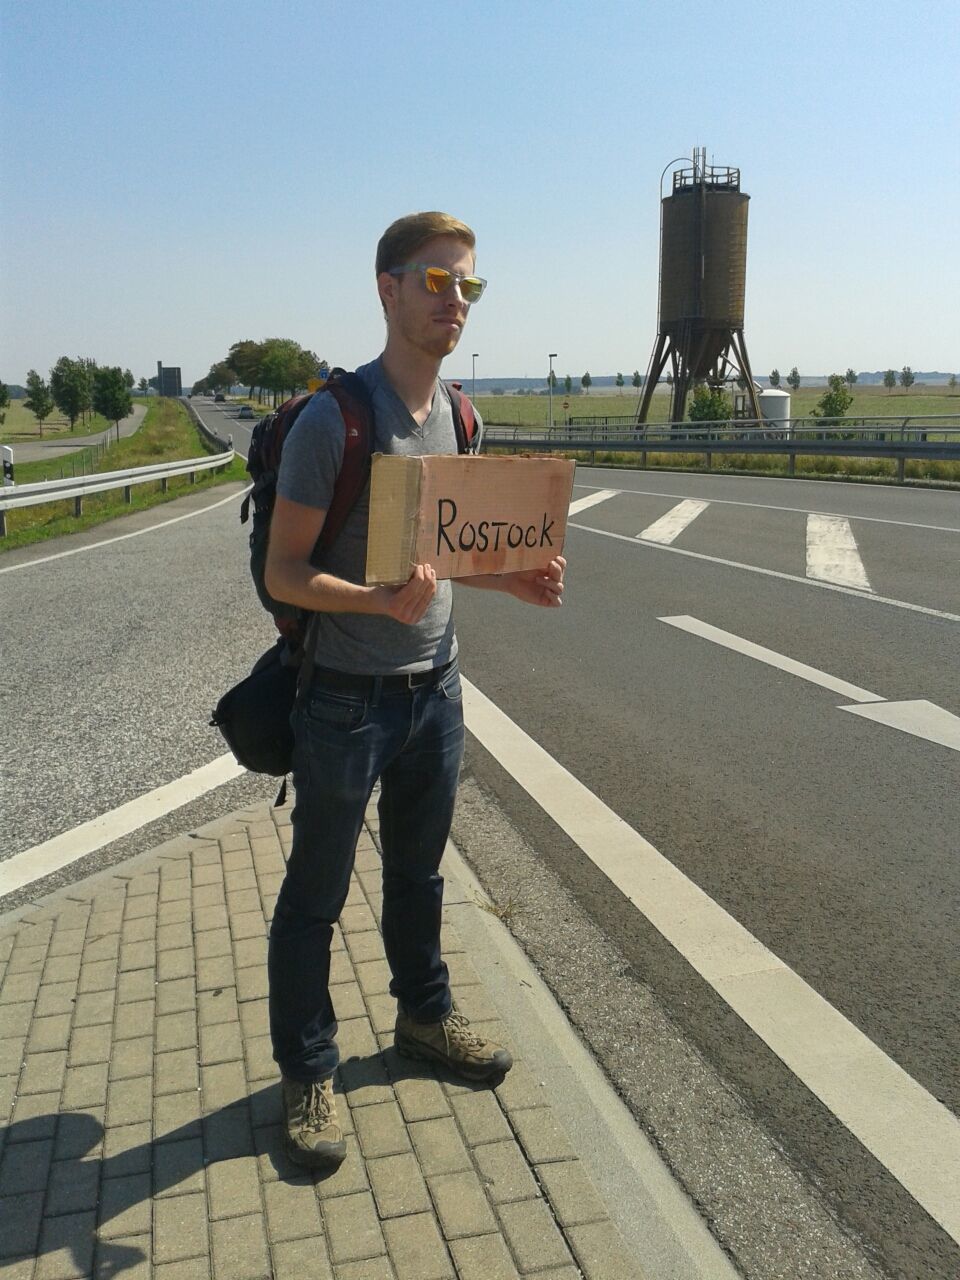 Young man holding sign while standing on street